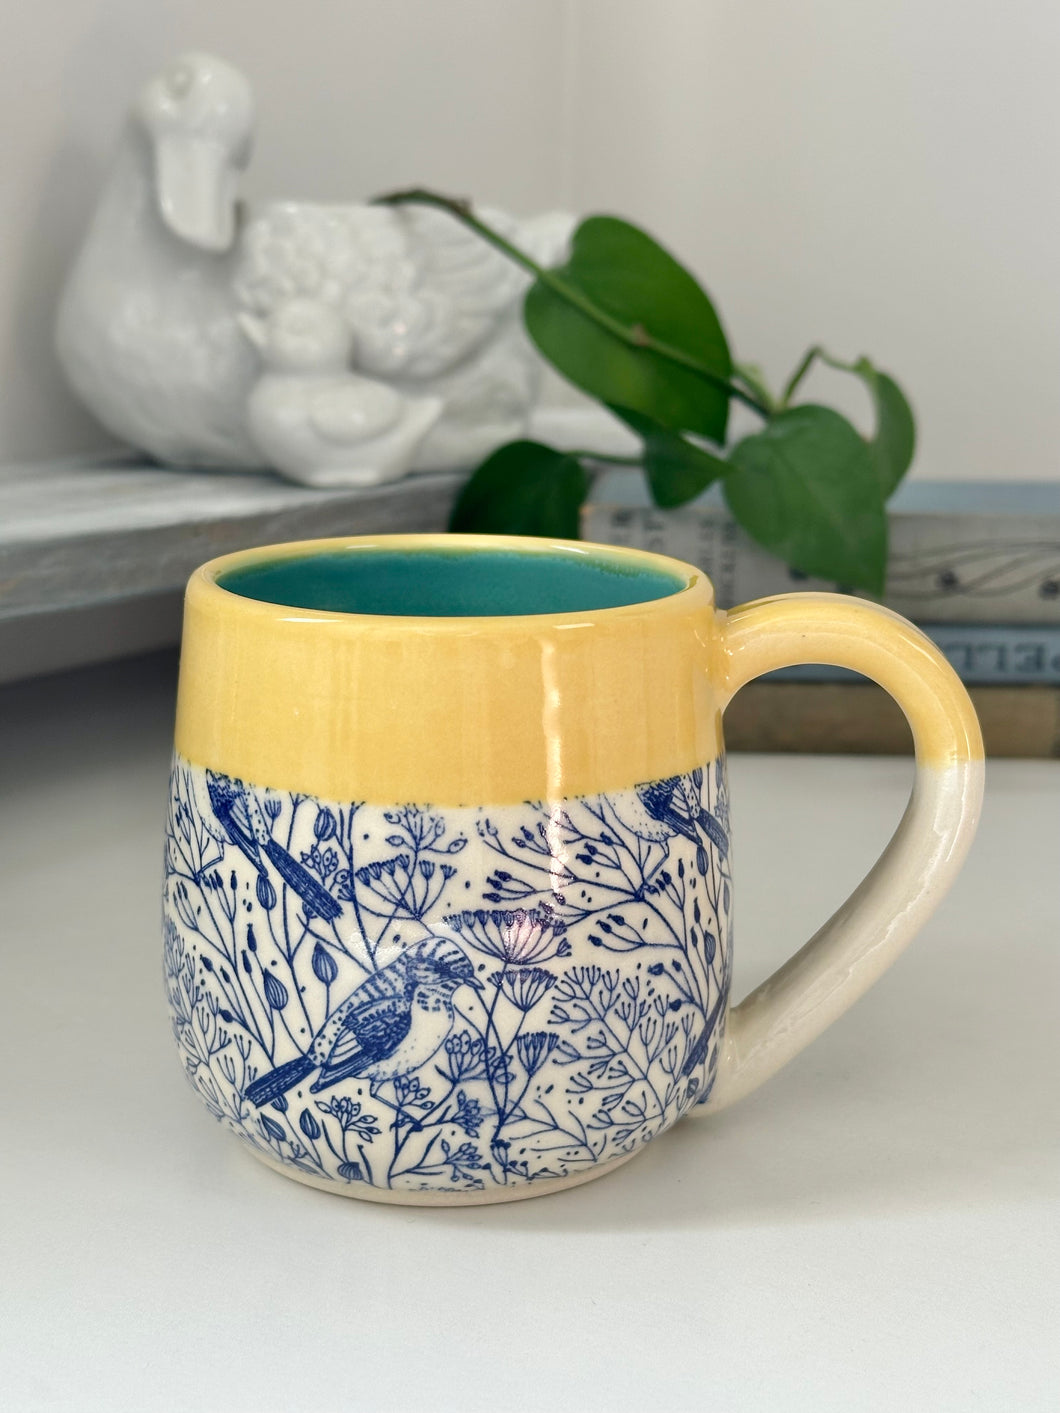 #002 - 14-16 oz. Birds in blue mug with yellow rim and turquoise inside *see notes